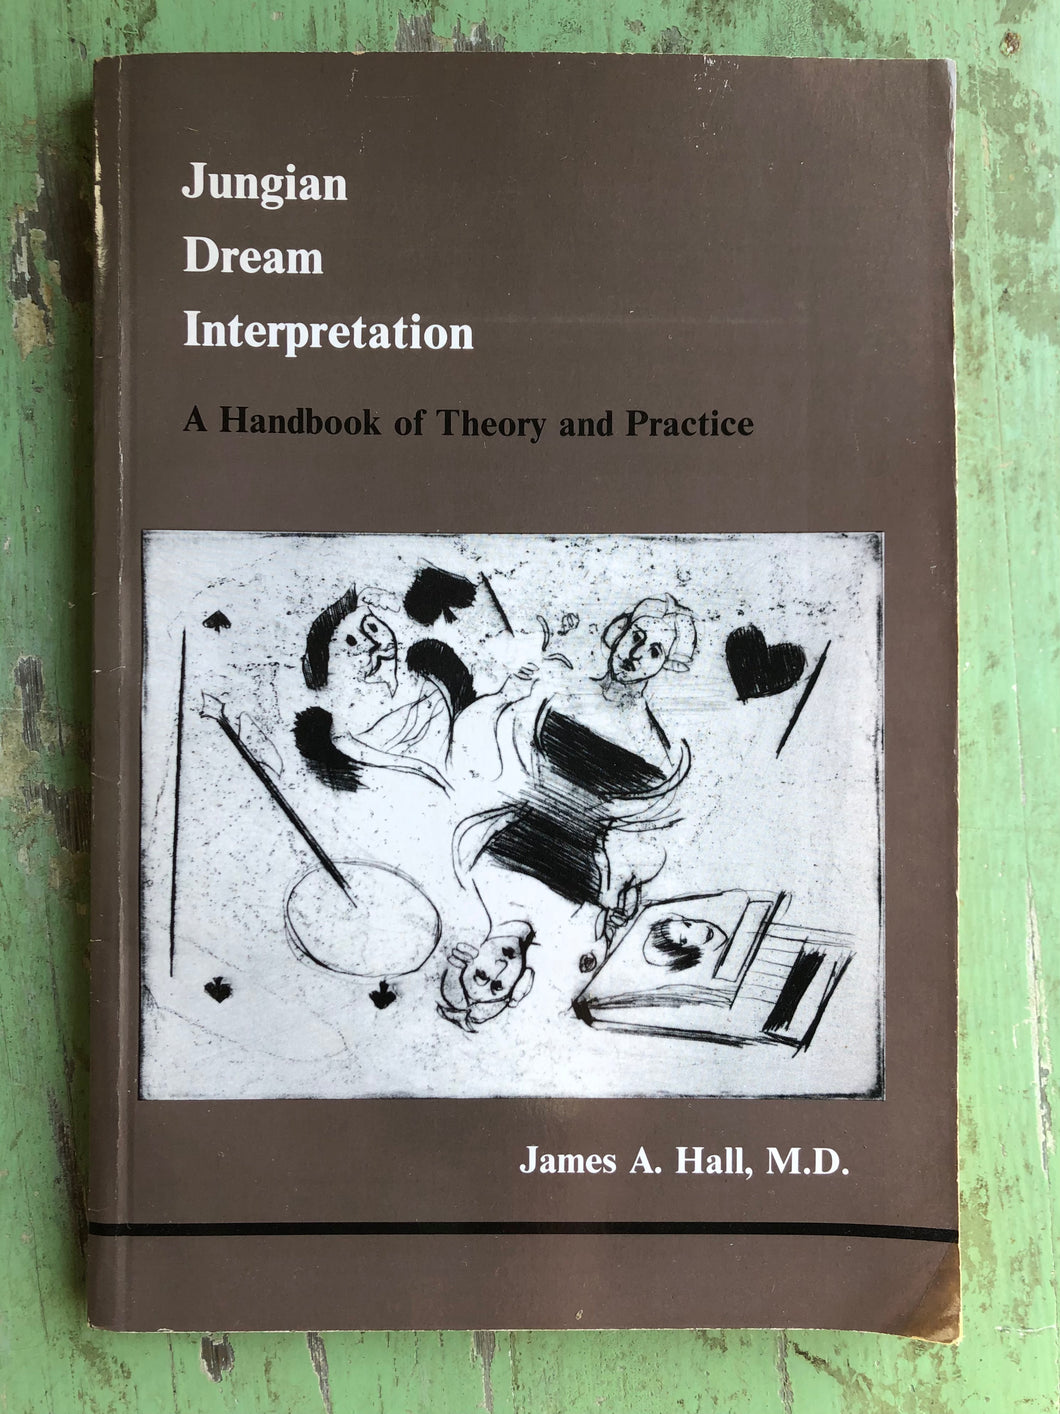 Jungian Dream Interpretation: A Handbook of Theory and Practice. by James A. Hall